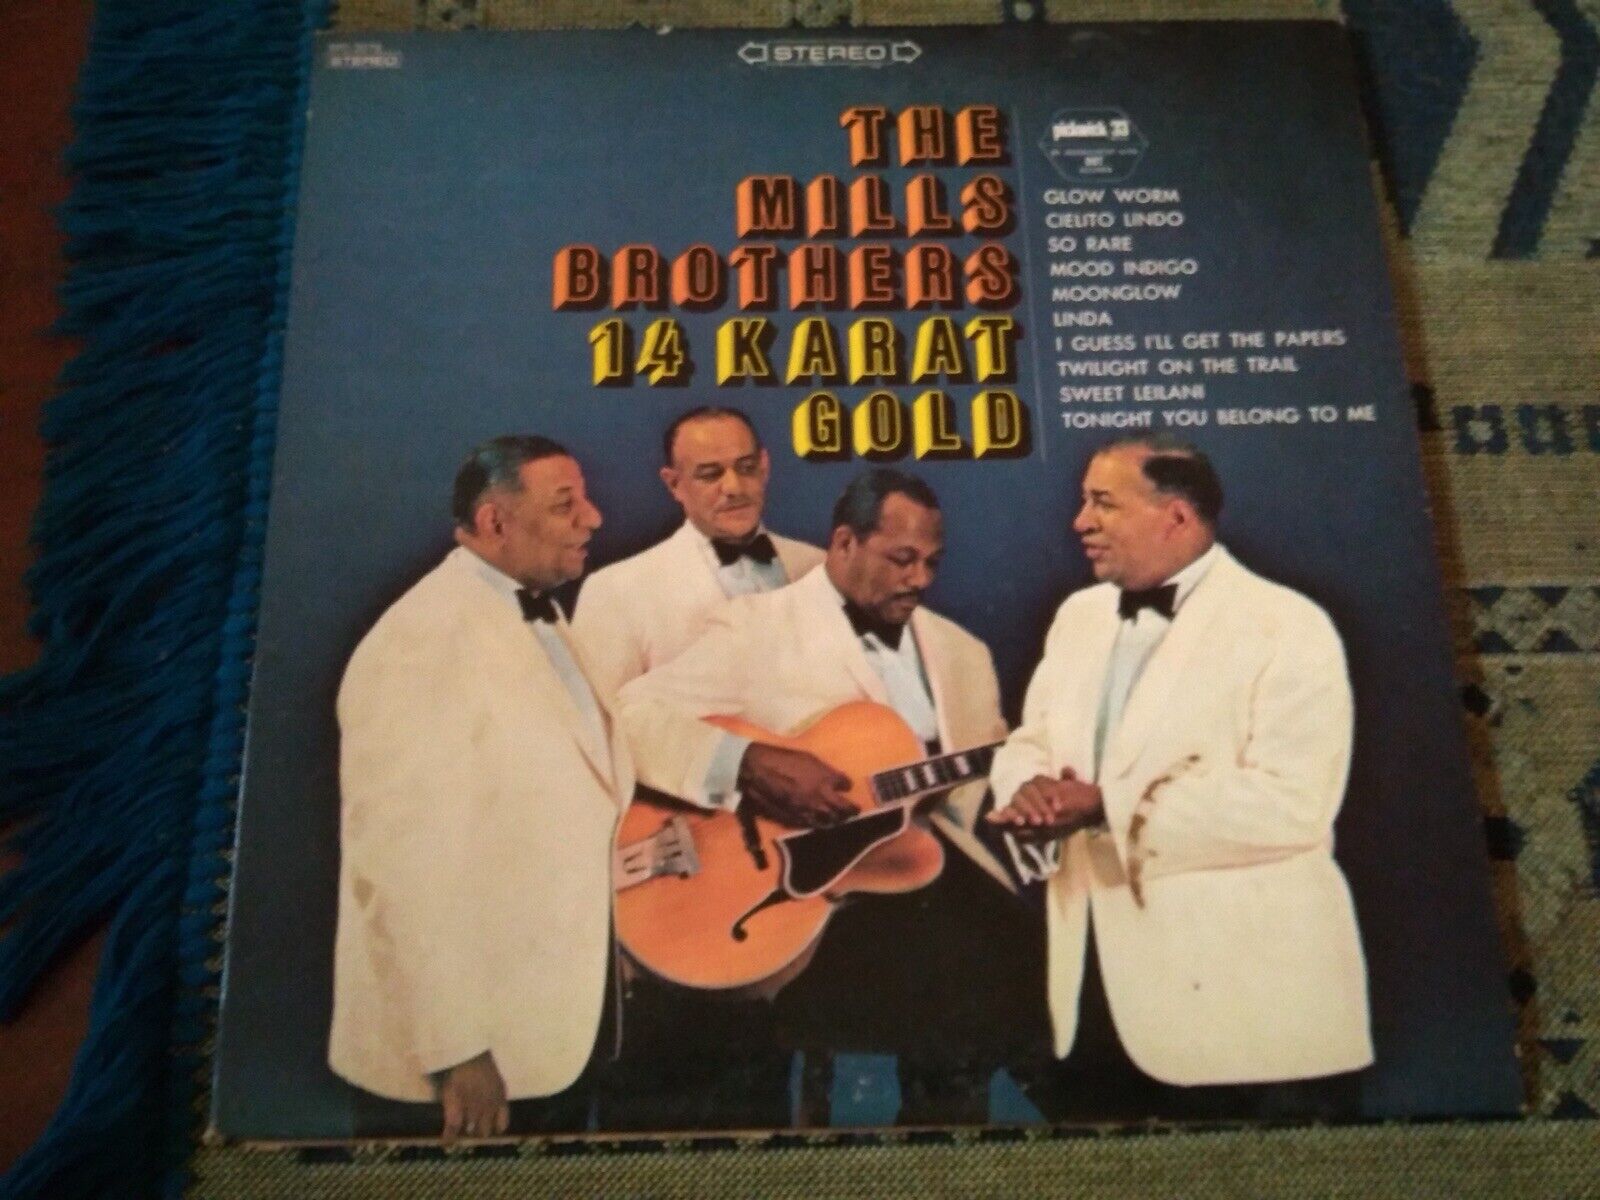 Vintage LP, 1967, THE MILLS BROTHERS, 14 KT GOLD, Near Mint, See Pictures